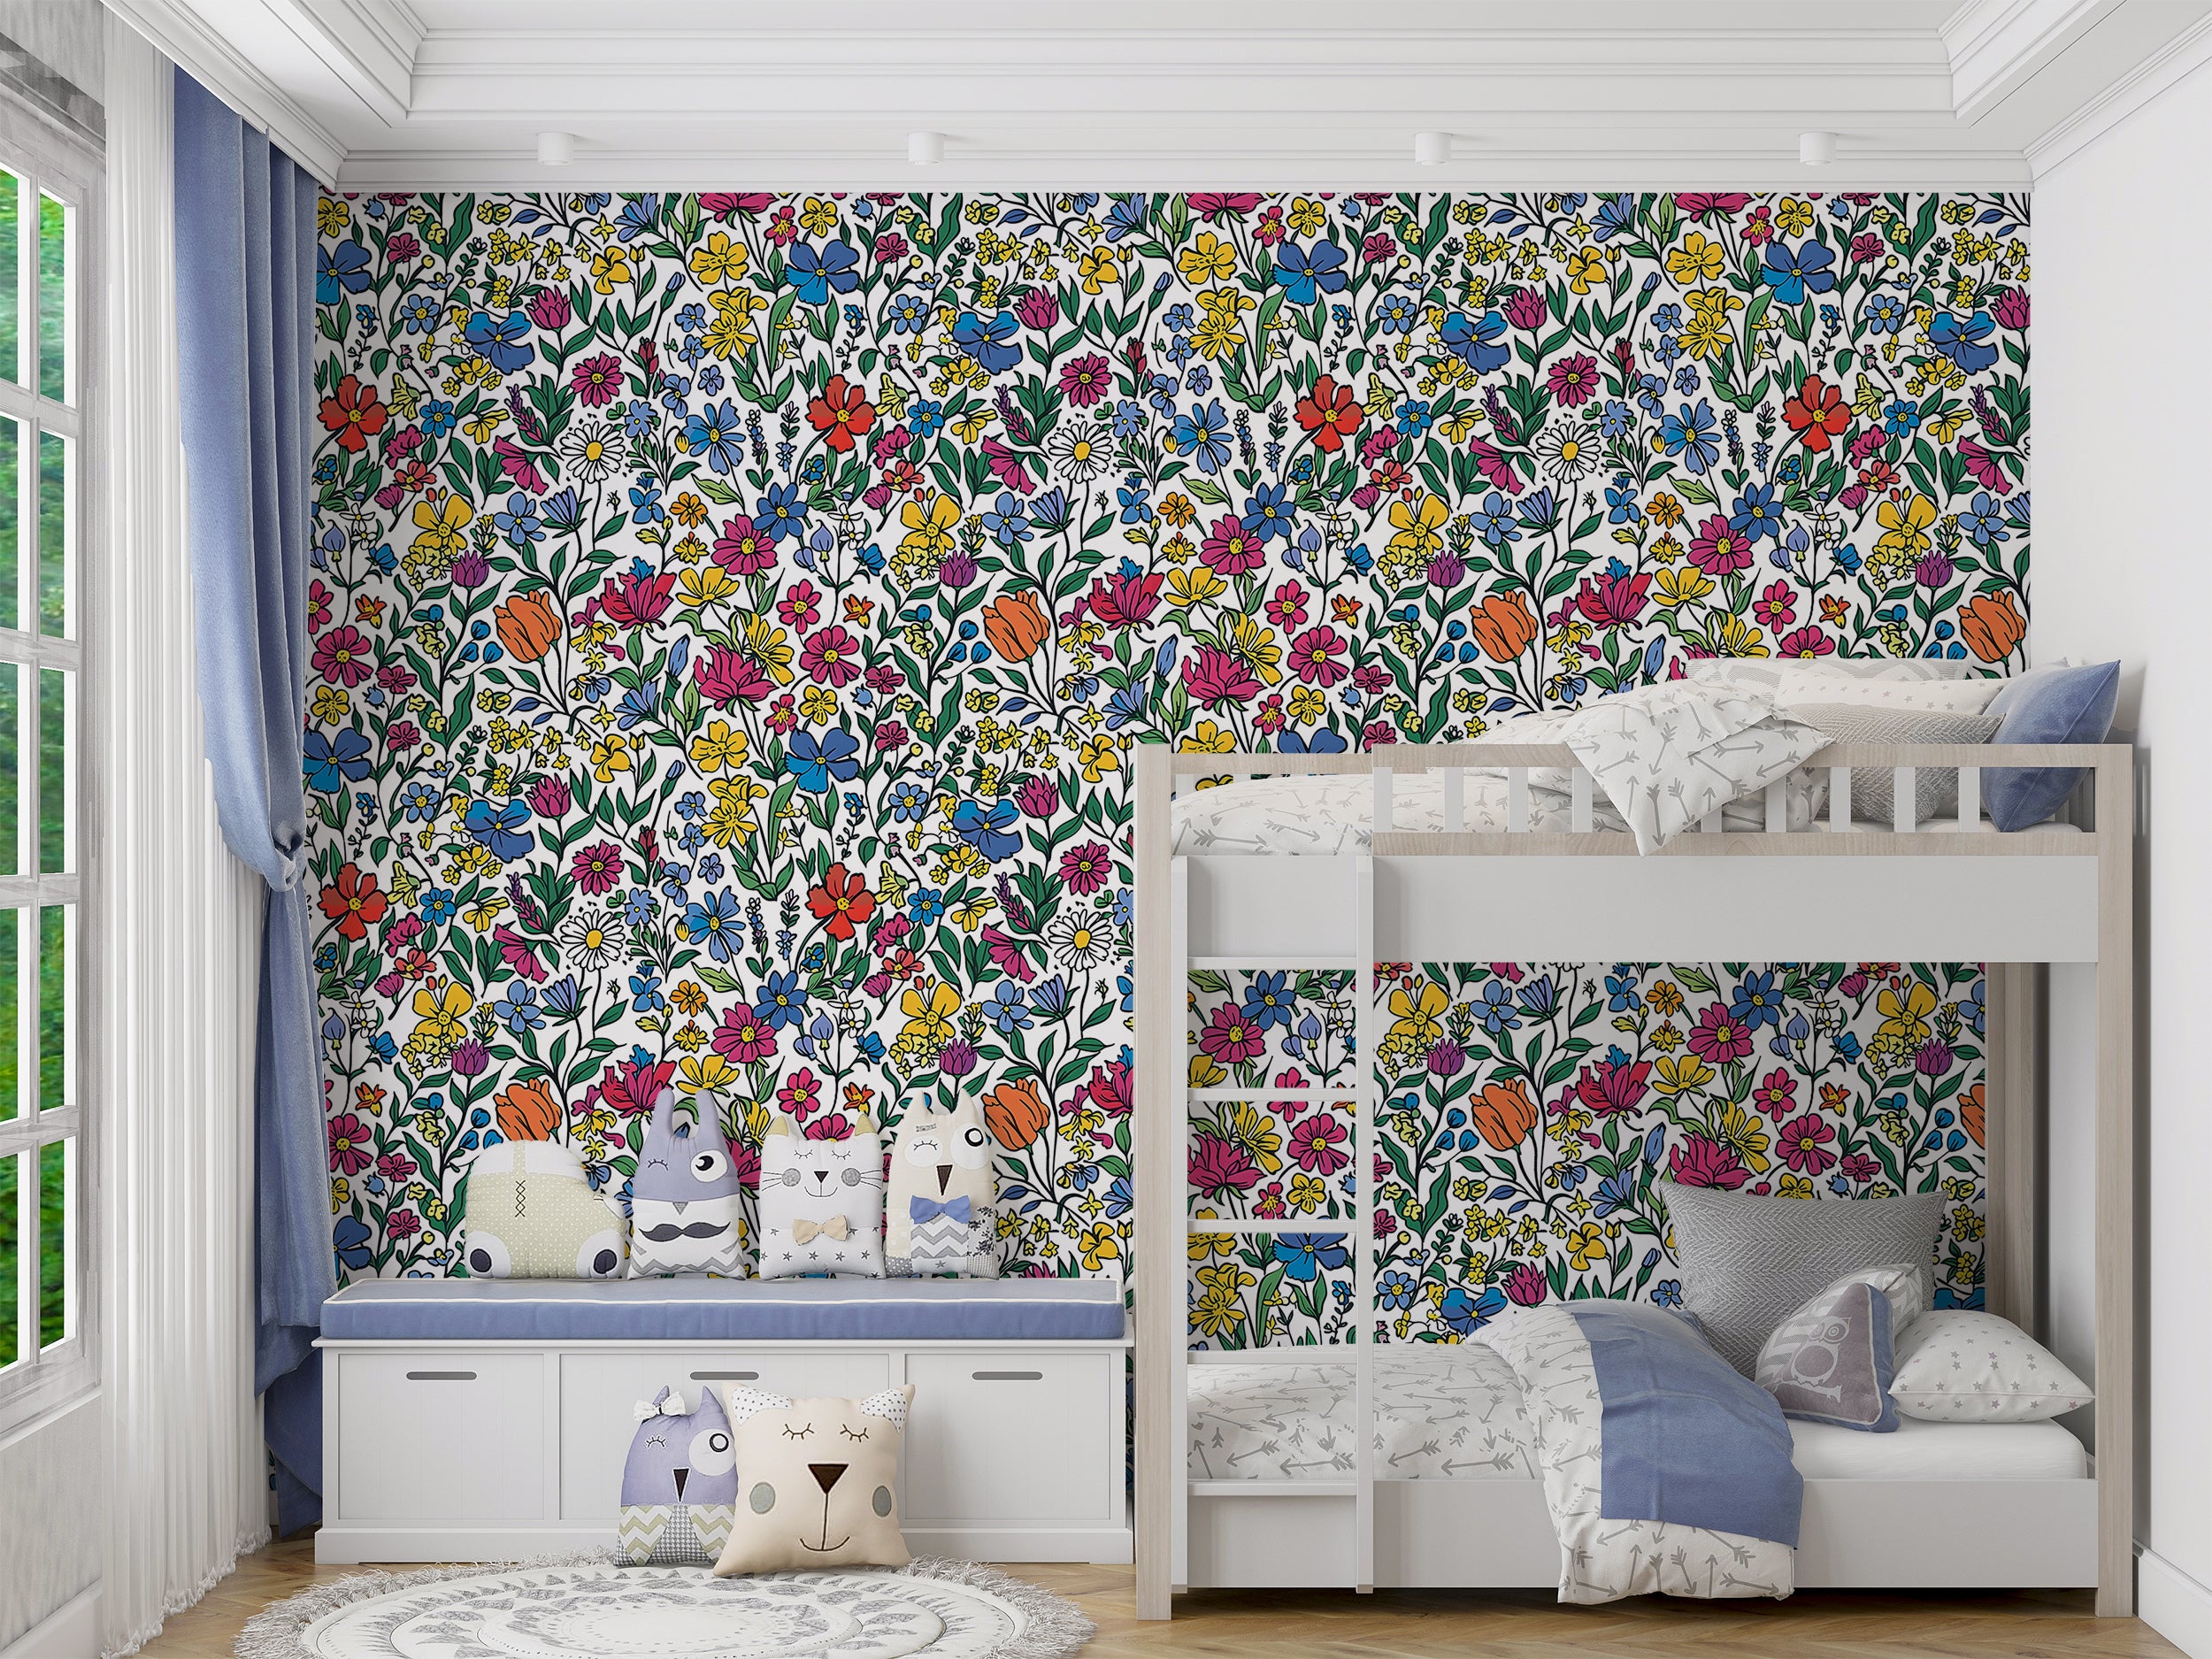 Colorful Floral Wallpaper, Watercolor Peel and Stick Meadow Flowers Wall Decal, Removable Cartoon Style Wild Flower Pattern Wallpaper